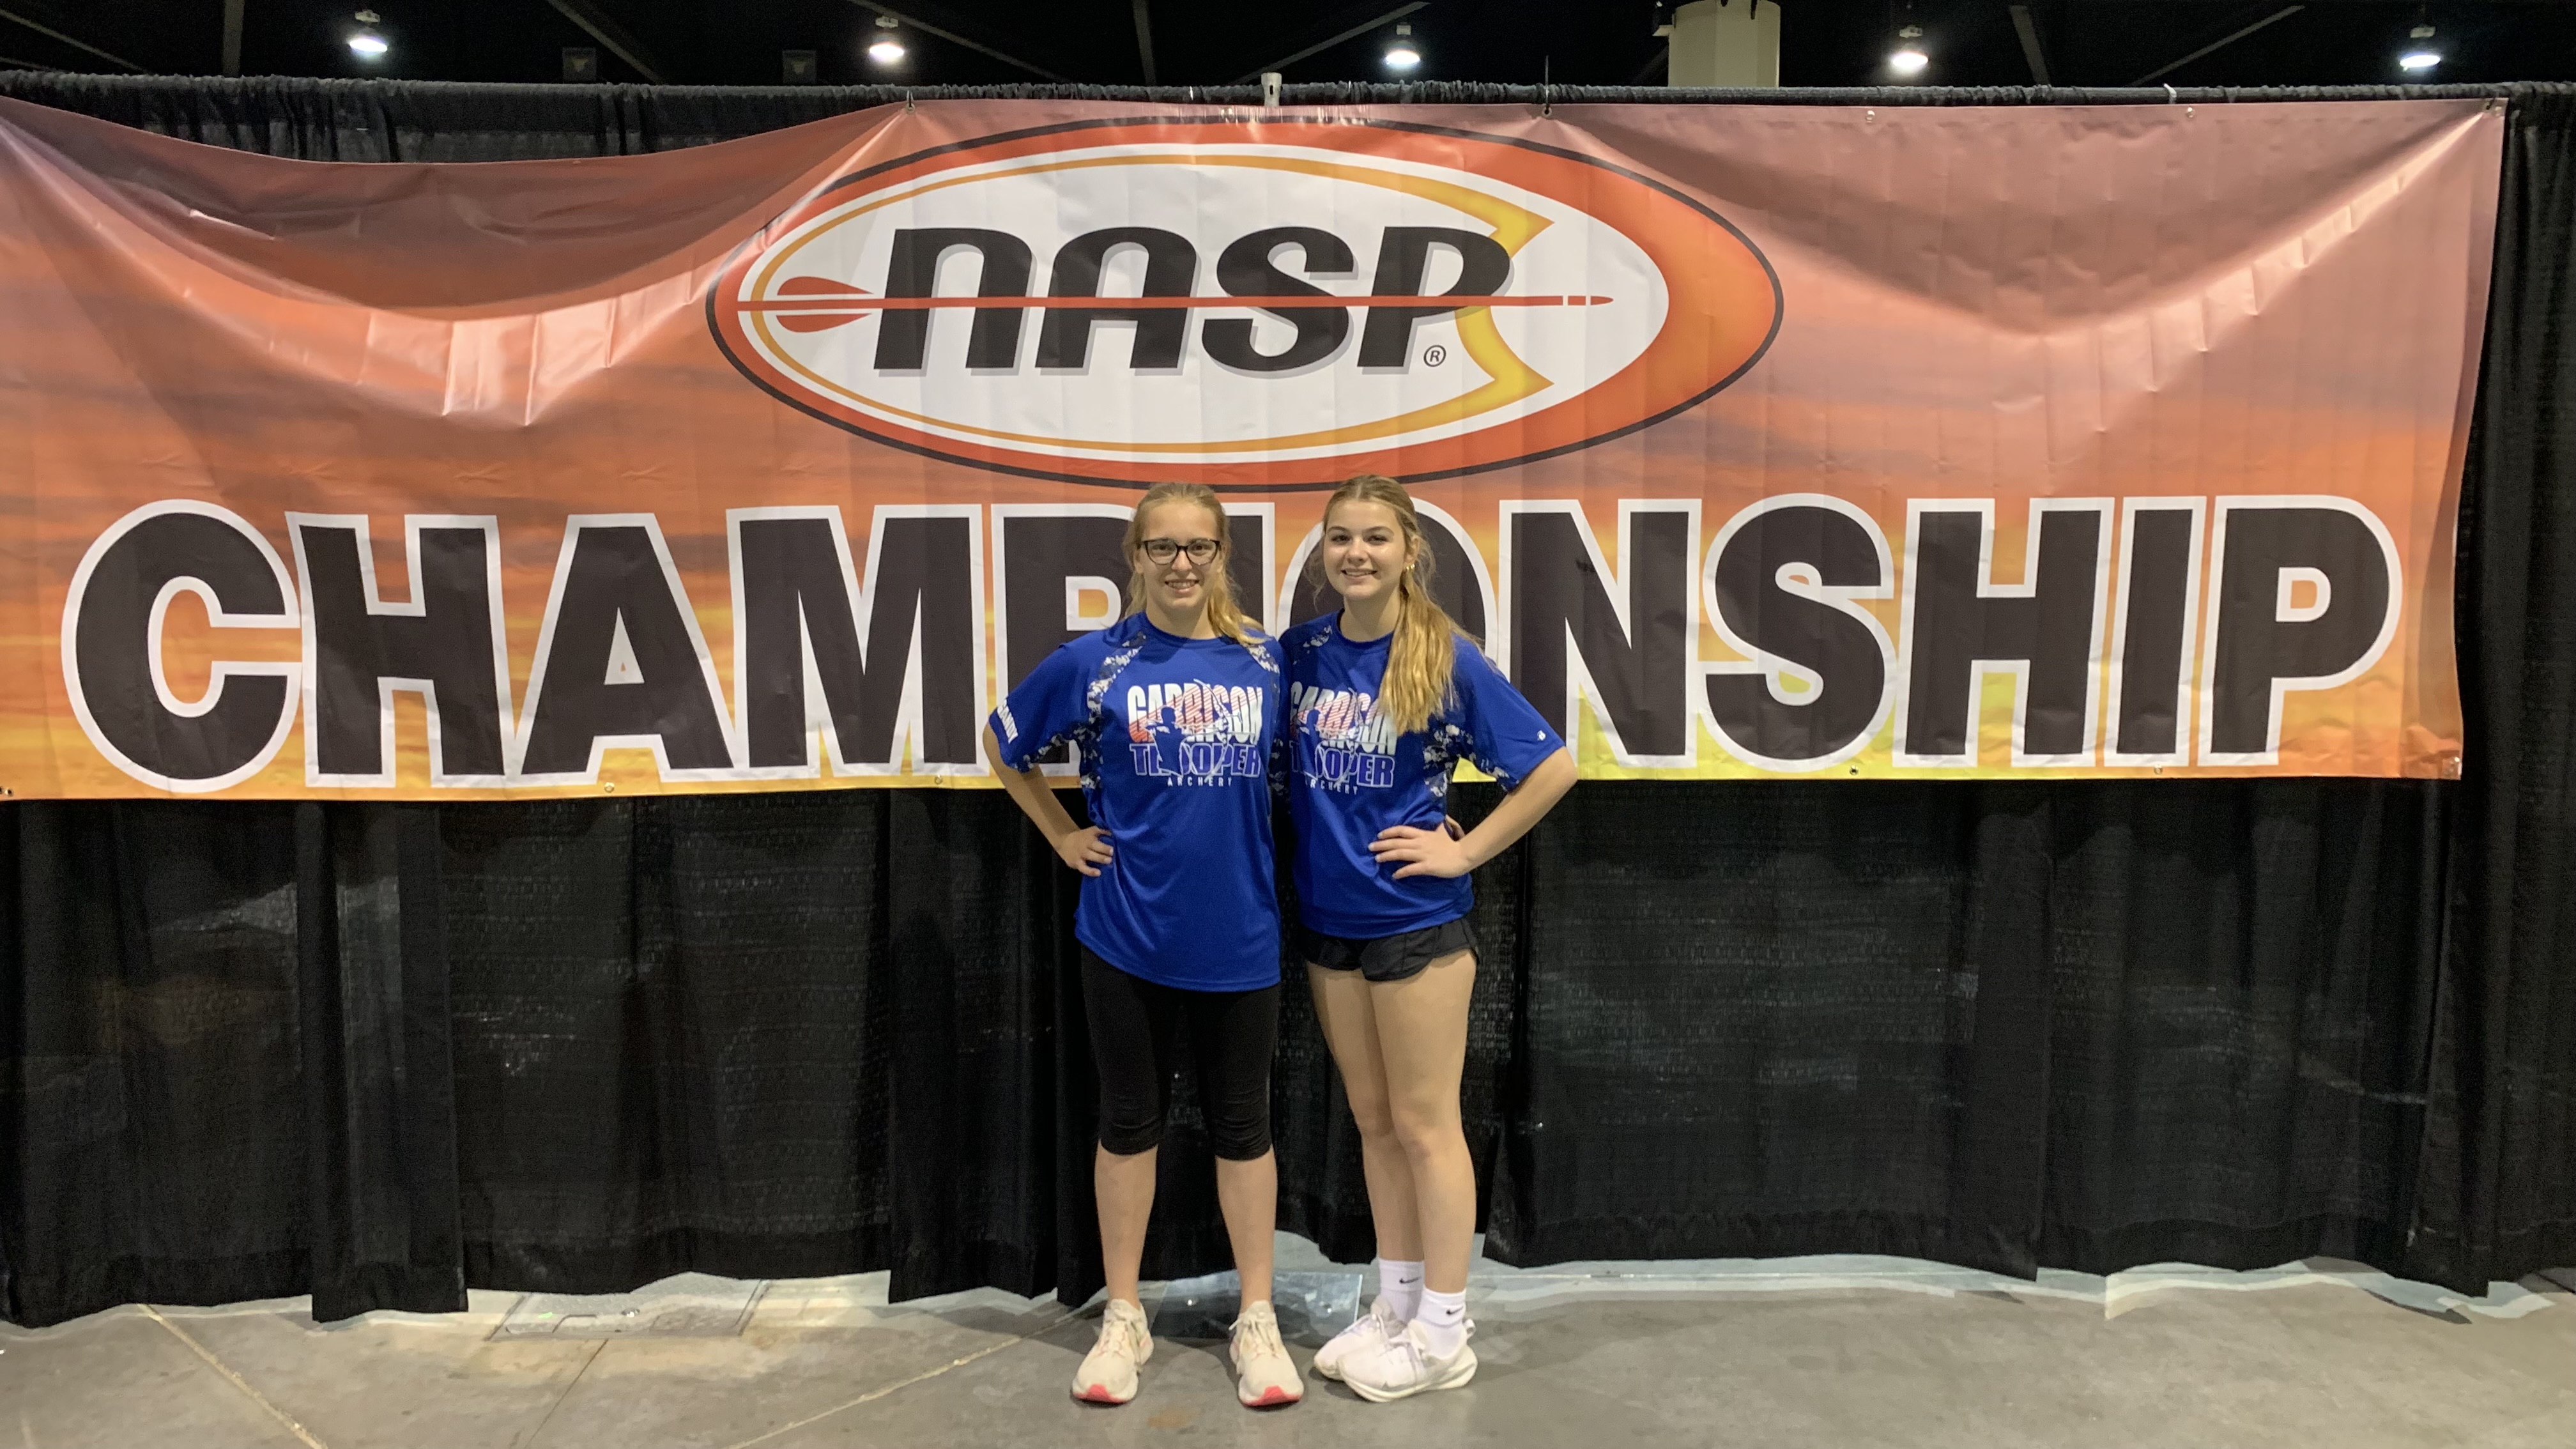 Magandy, Smith competed in NASP Archery World’s Championship